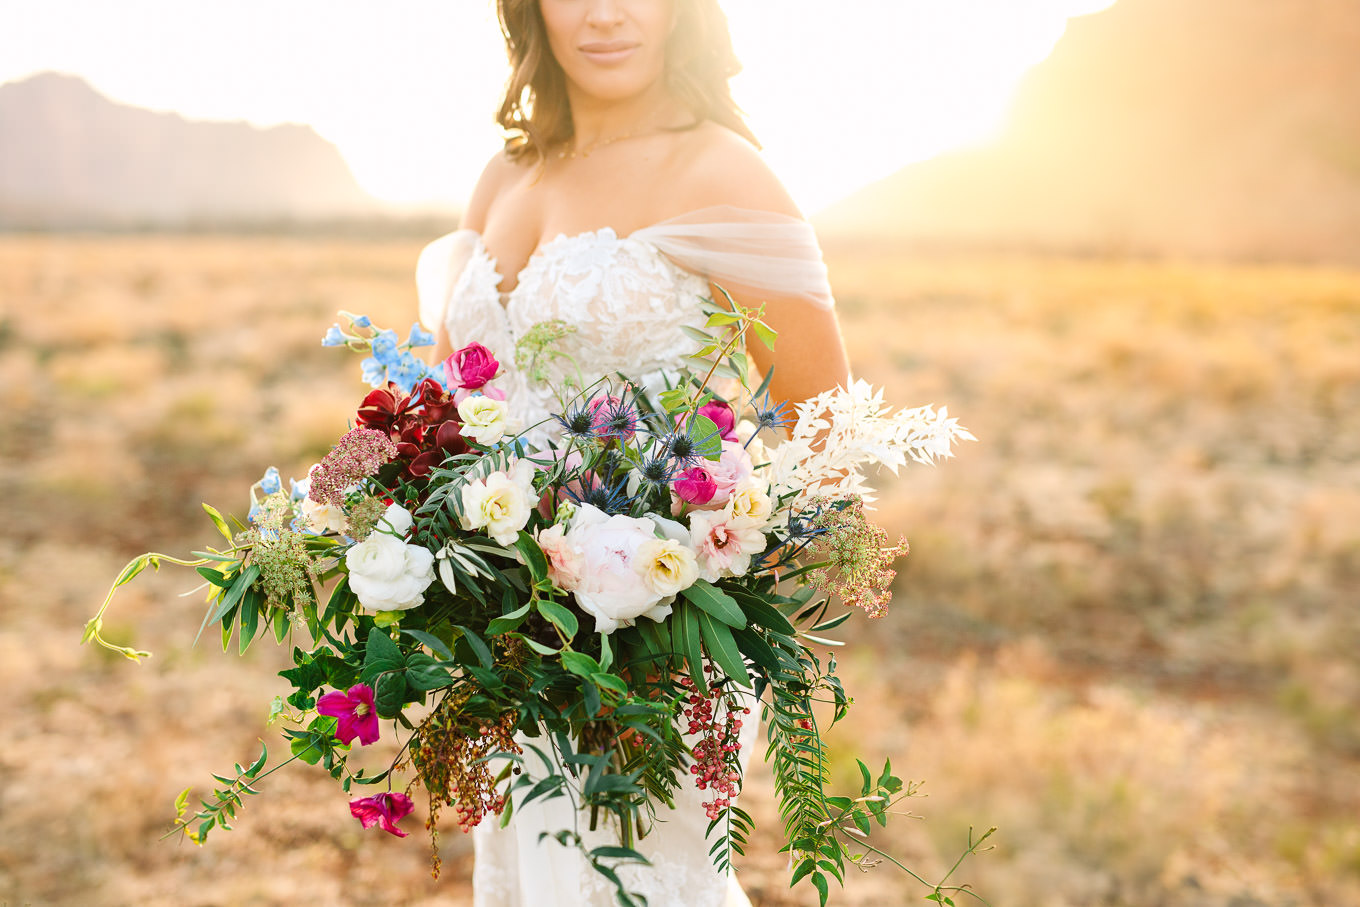 Lush and colorful bride bouquet | Zion Under Canvas Elopement at Sunrise | Colorful adventure elopement photography | #utahelopement #zionelopement #zionwedding #undercanvaszion   Source: Mary Costa Photography | Los Angeles